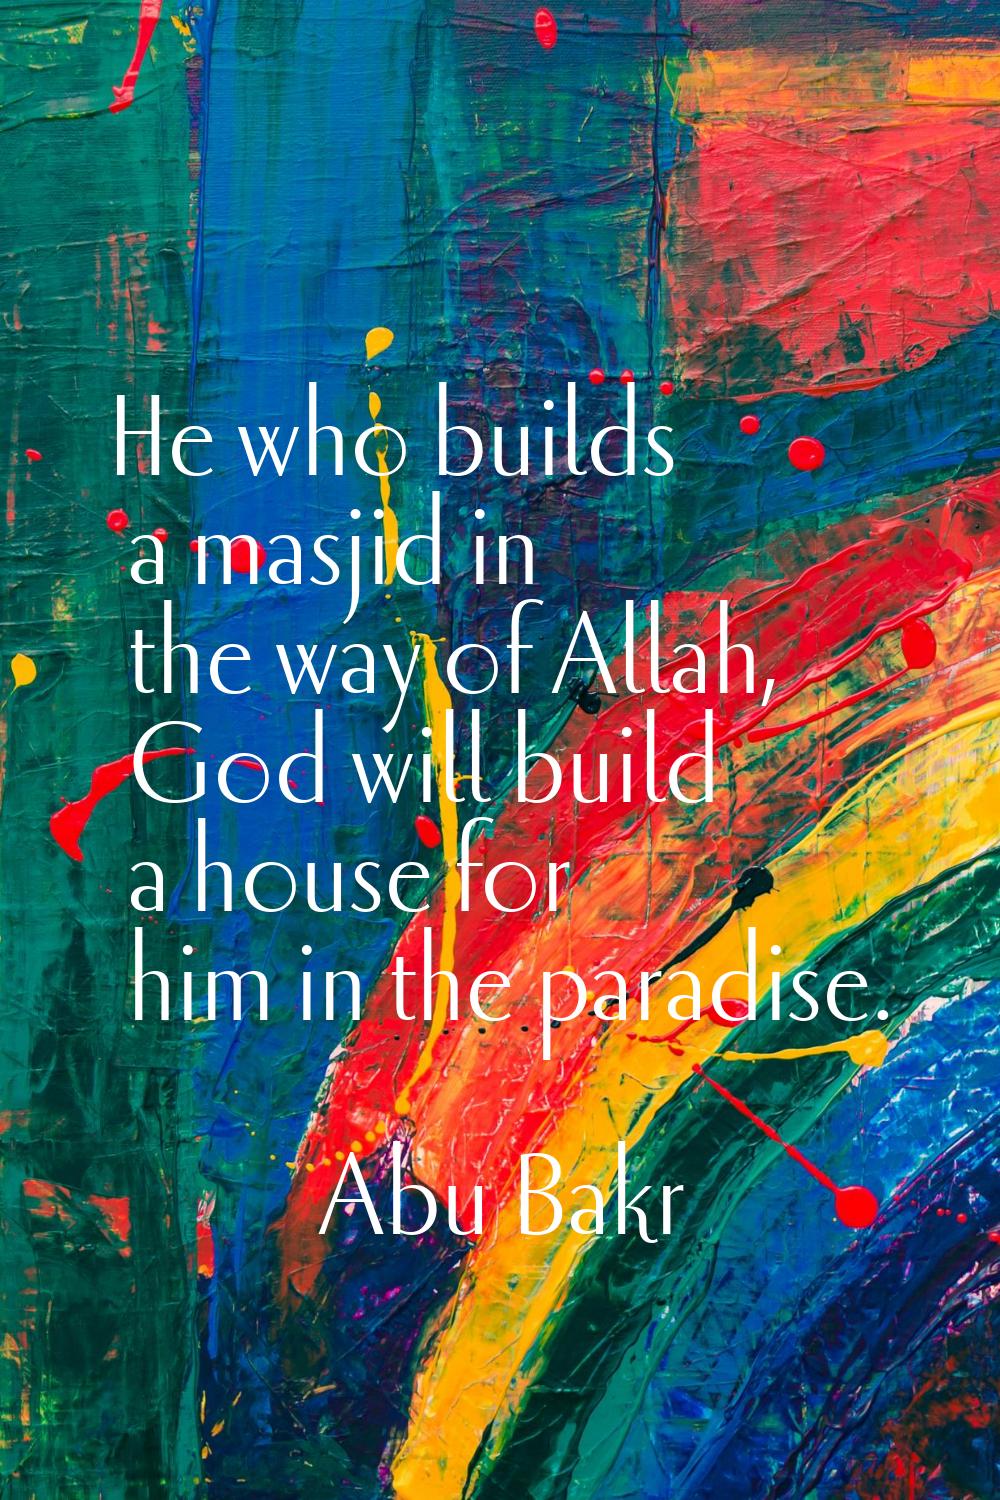 He who builds a masjid in the way of Allah, God will build a house for him in the paradise.